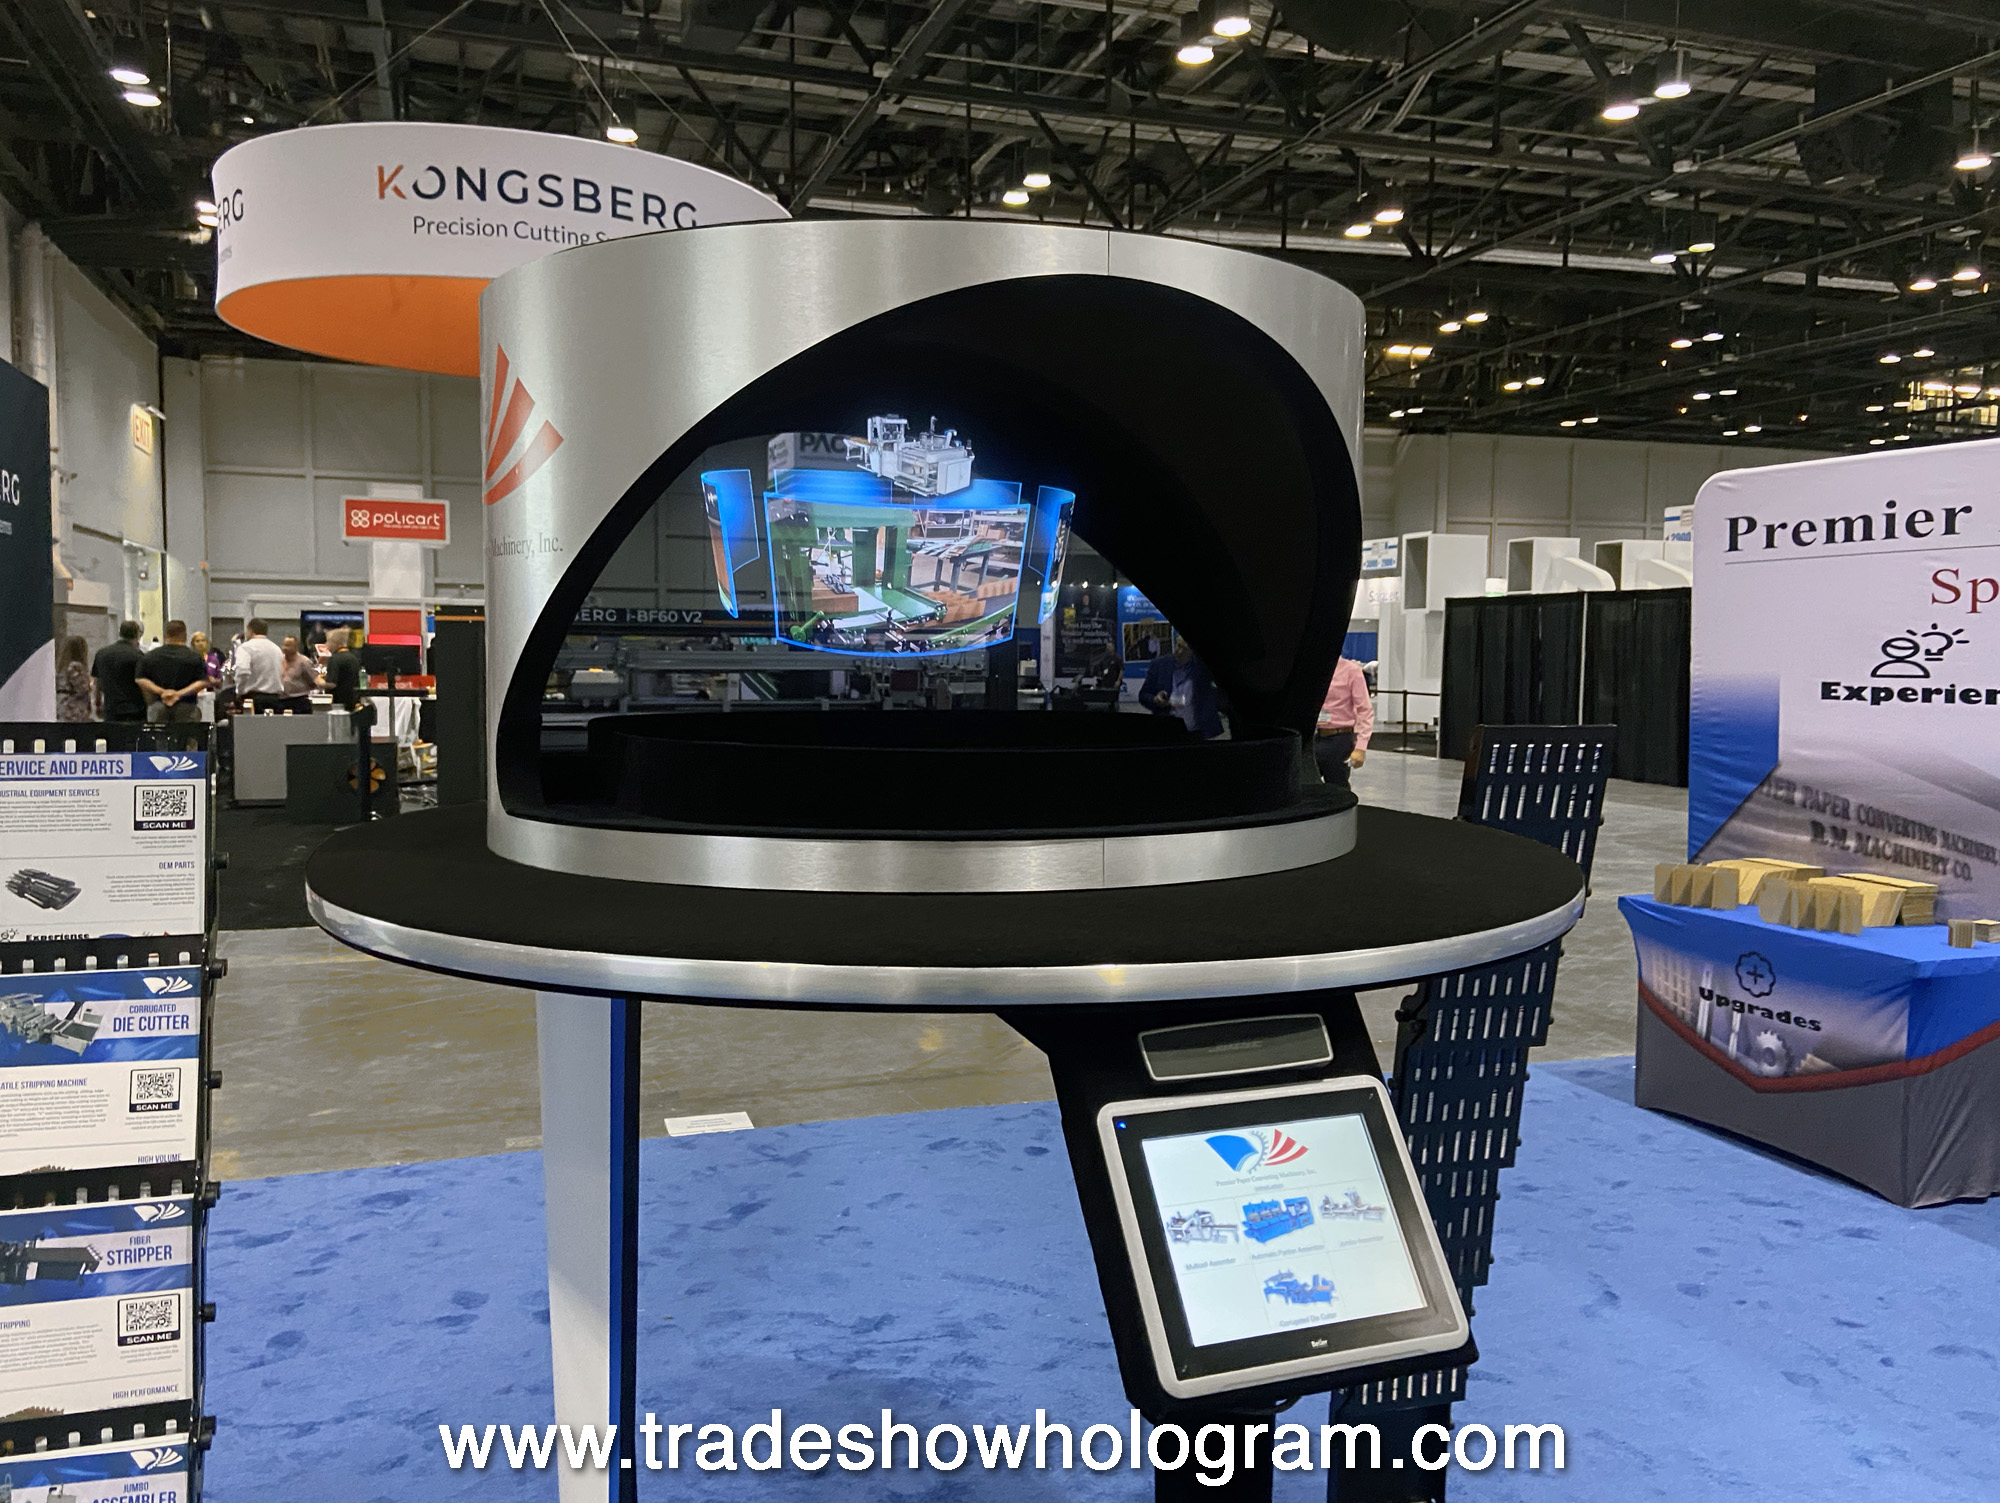 Holographic Trade Show Exhibits - Hologram Rentals and Sales for Trade  ShowsHolographic Trade Show Exhibits | Hologram Rentals and Sales for Trade  Shows